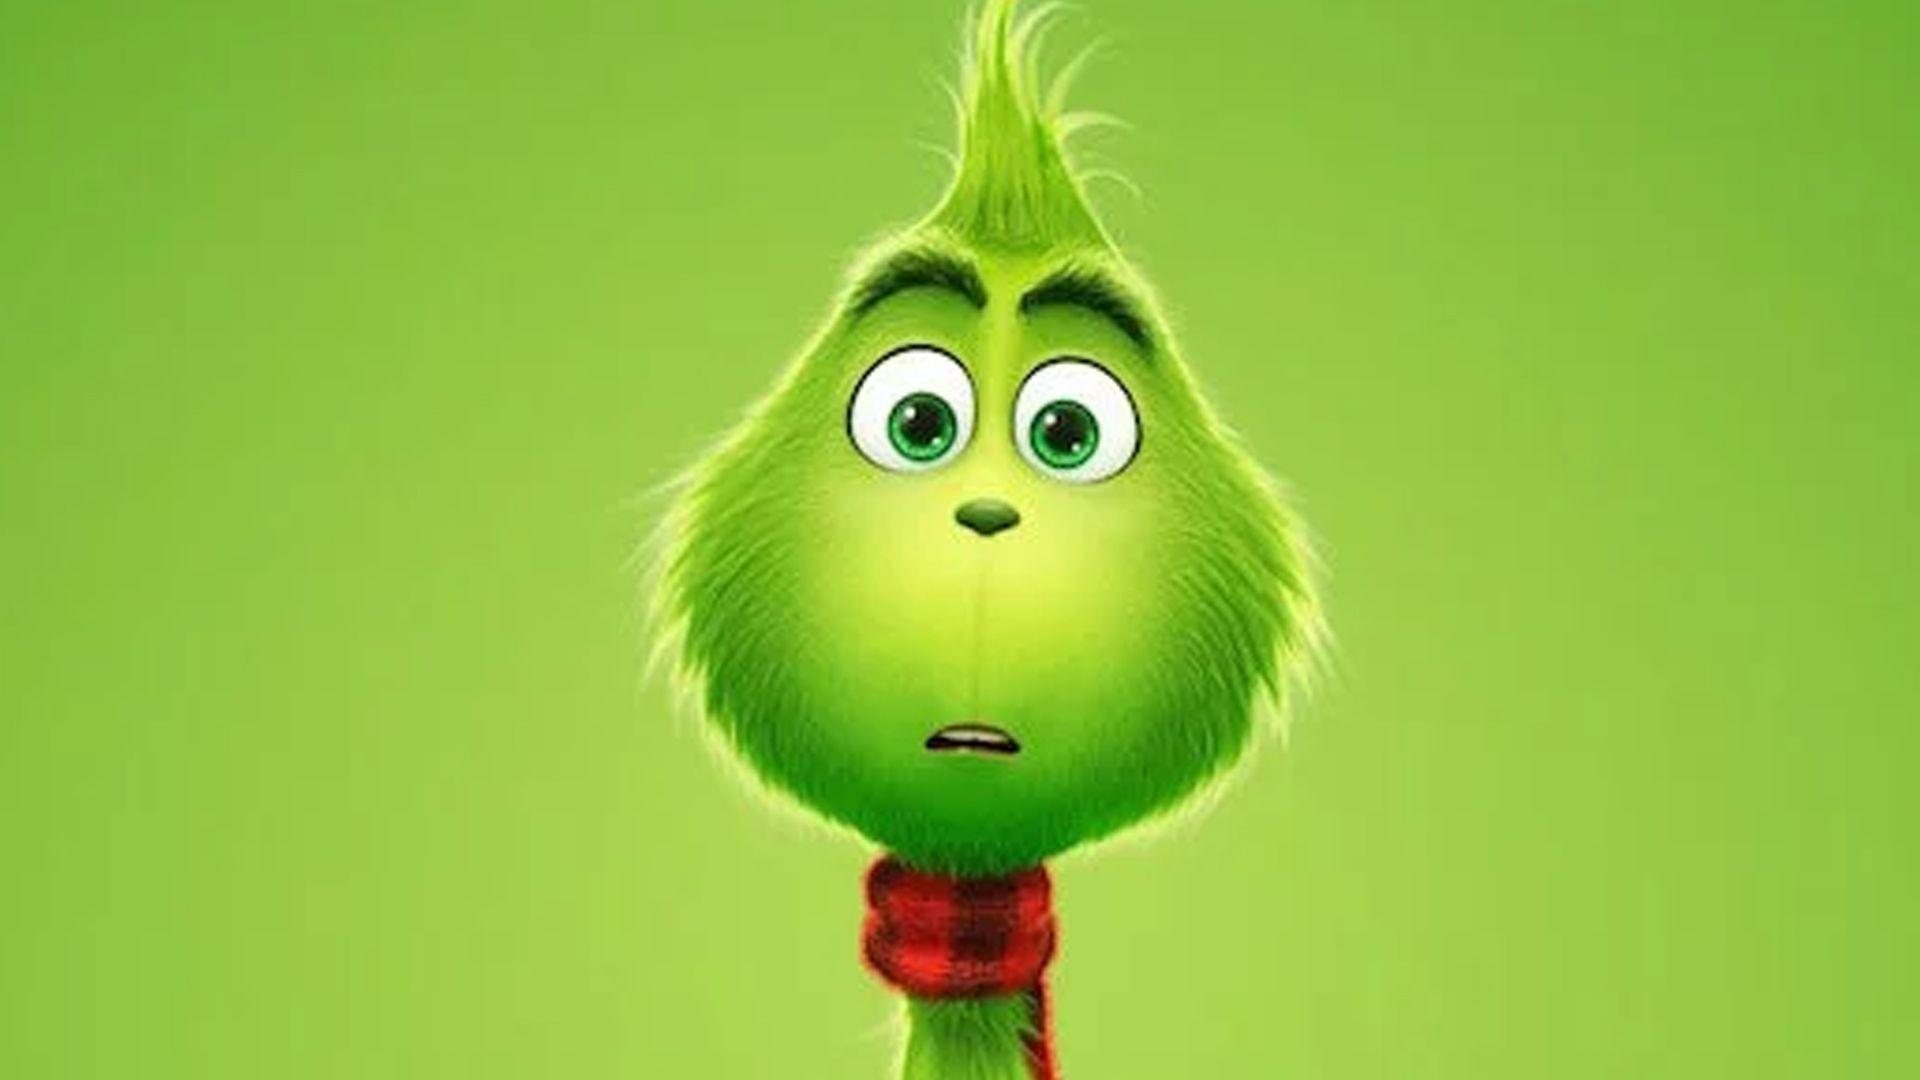 The Grinch” Out To Steal Christmas In New